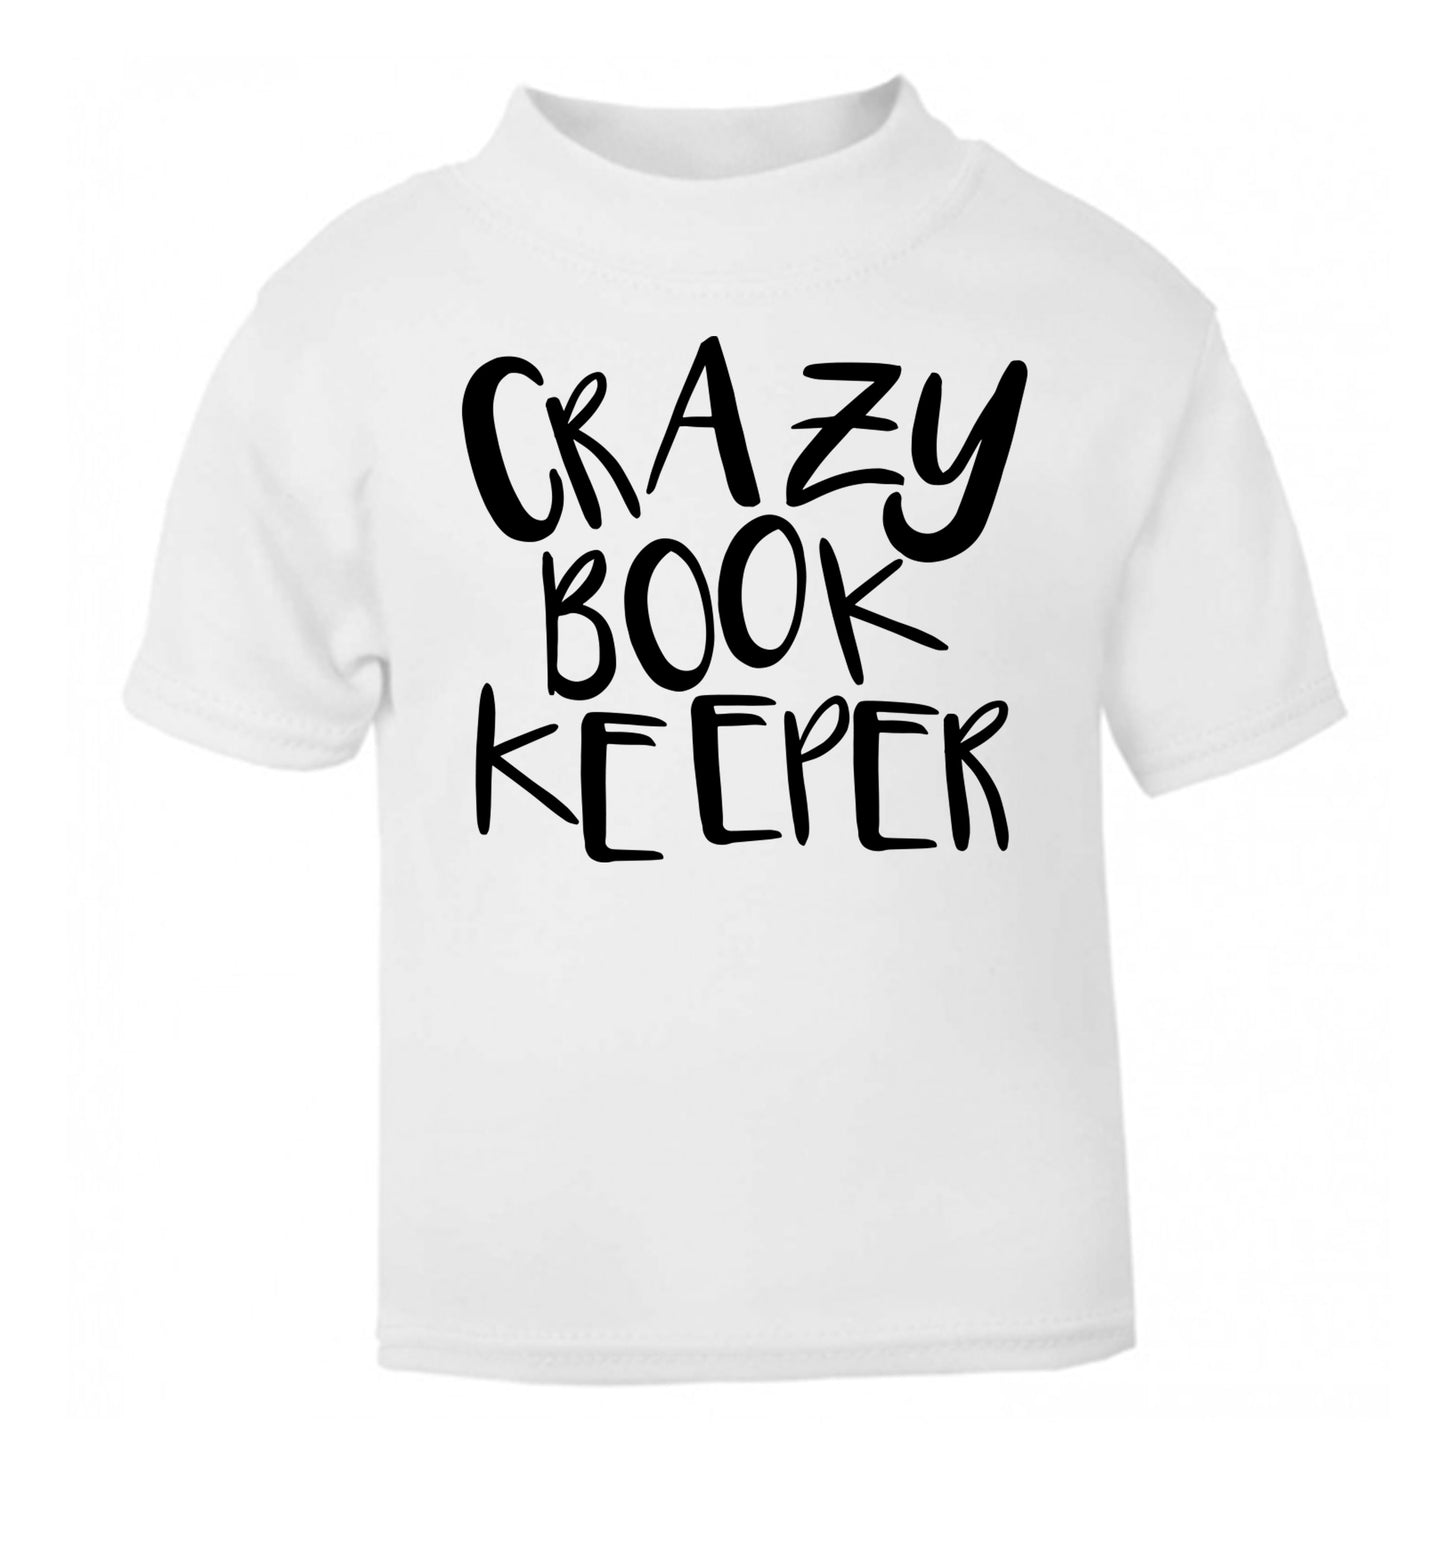 Crazy bookkeeper white Baby Toddler Tshirt 2 Years